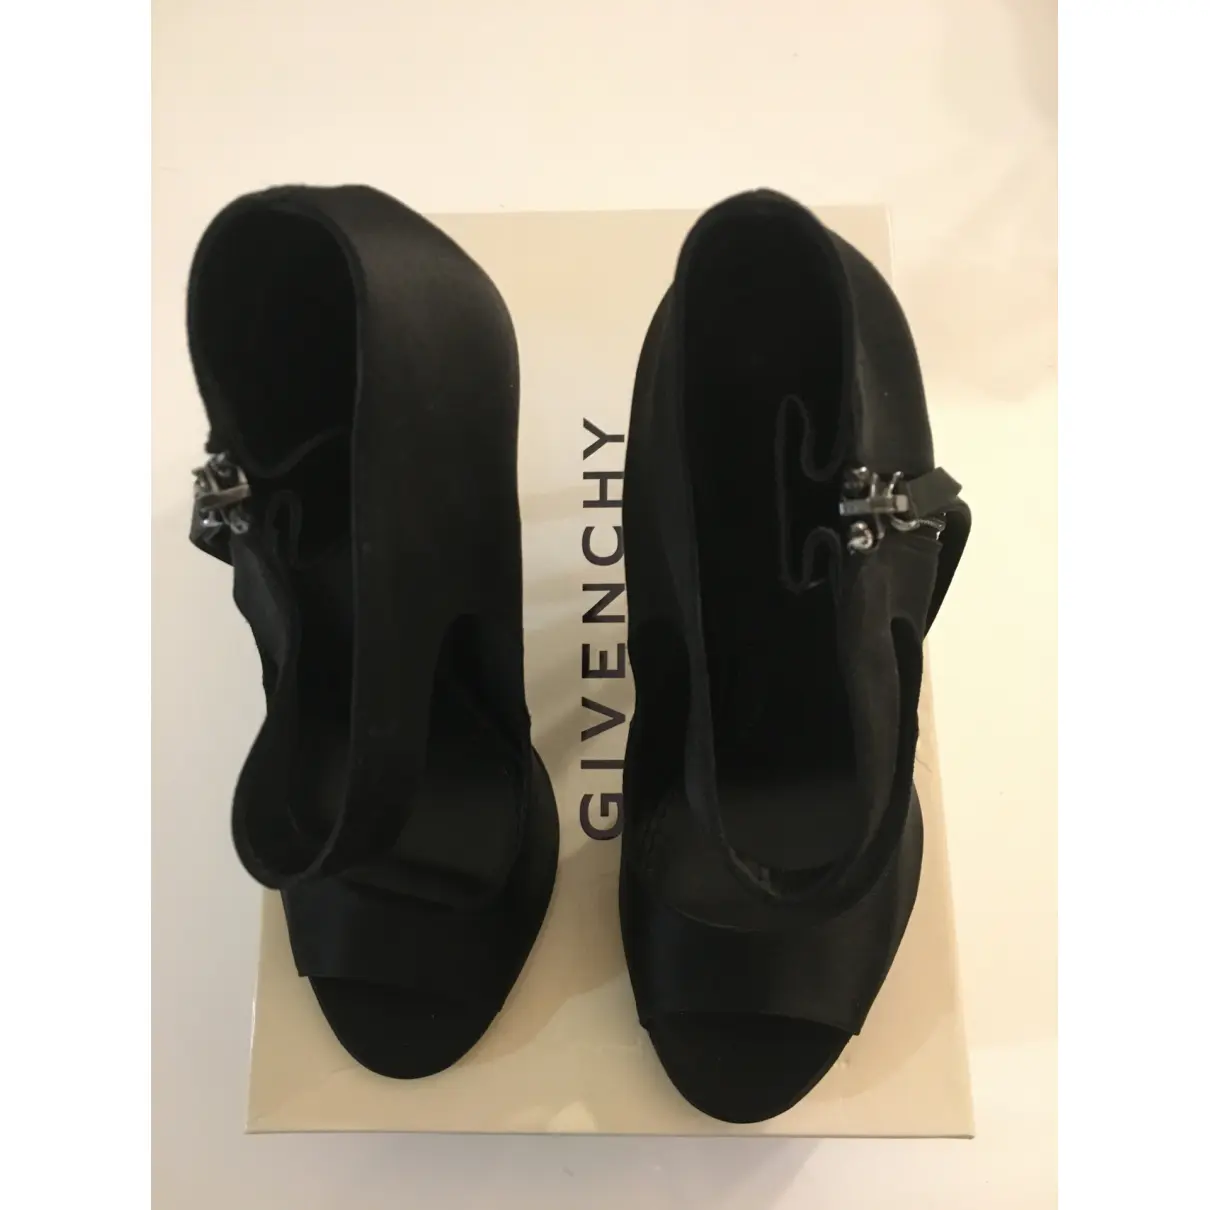 Buy Givenchy Cloth heels online